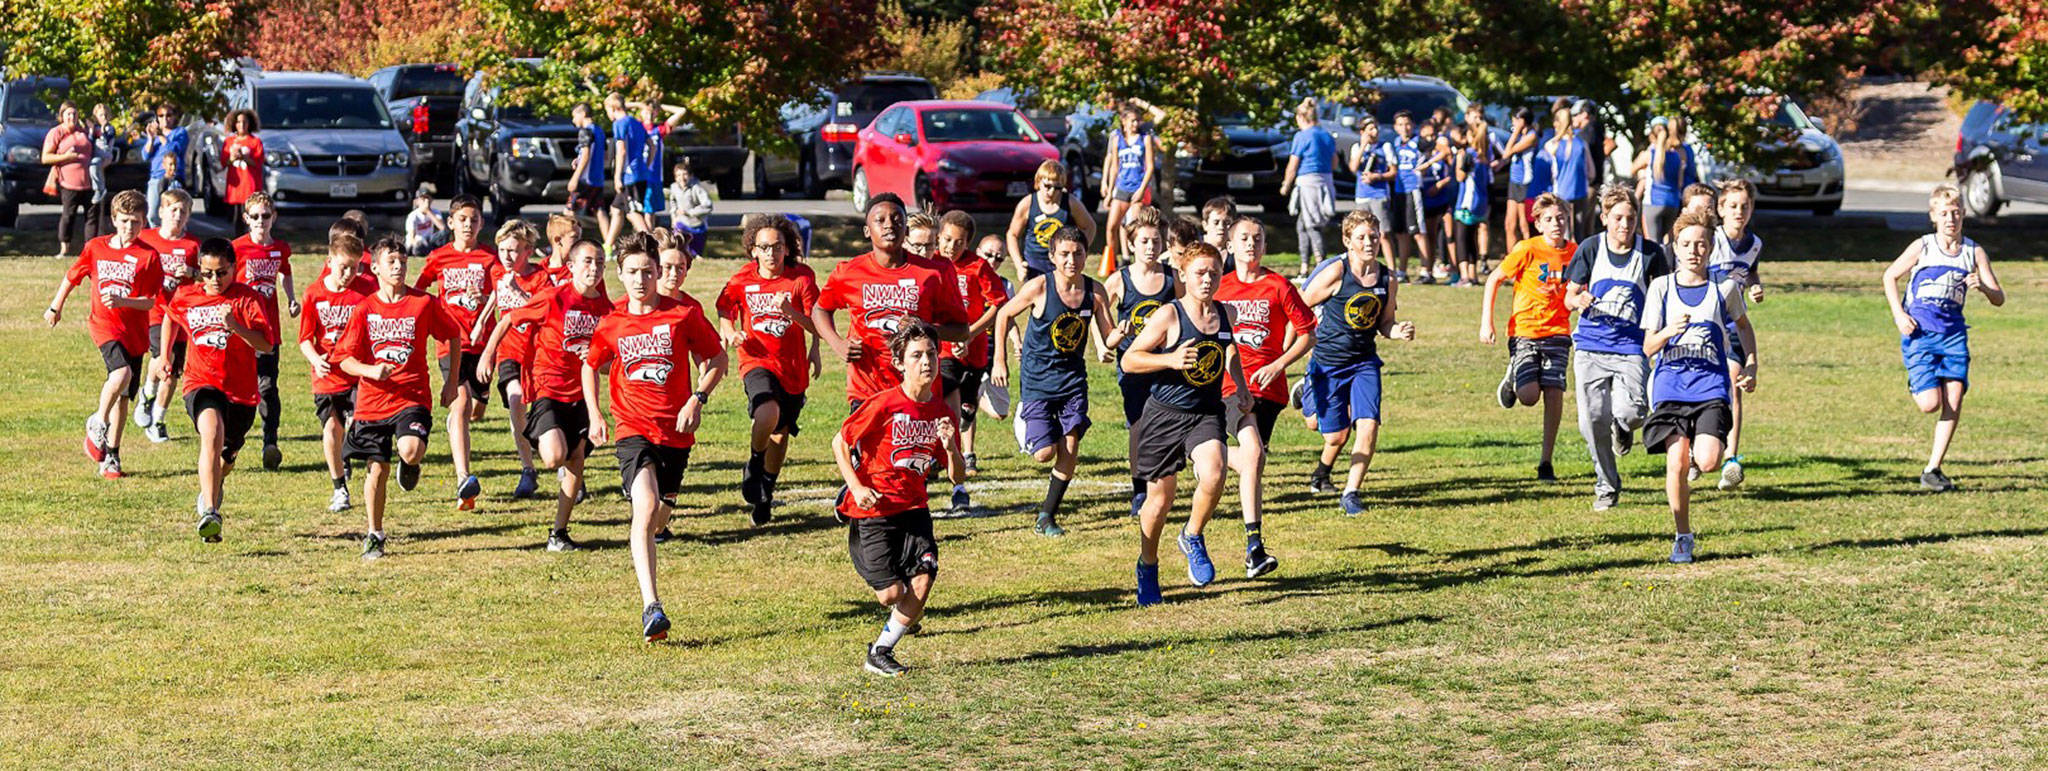 The North Whidbey seventh-grade boys (red shirts) take off from the start line Wednesday. Seven Cougars finished among the top eight.(Photo by John Fisken)